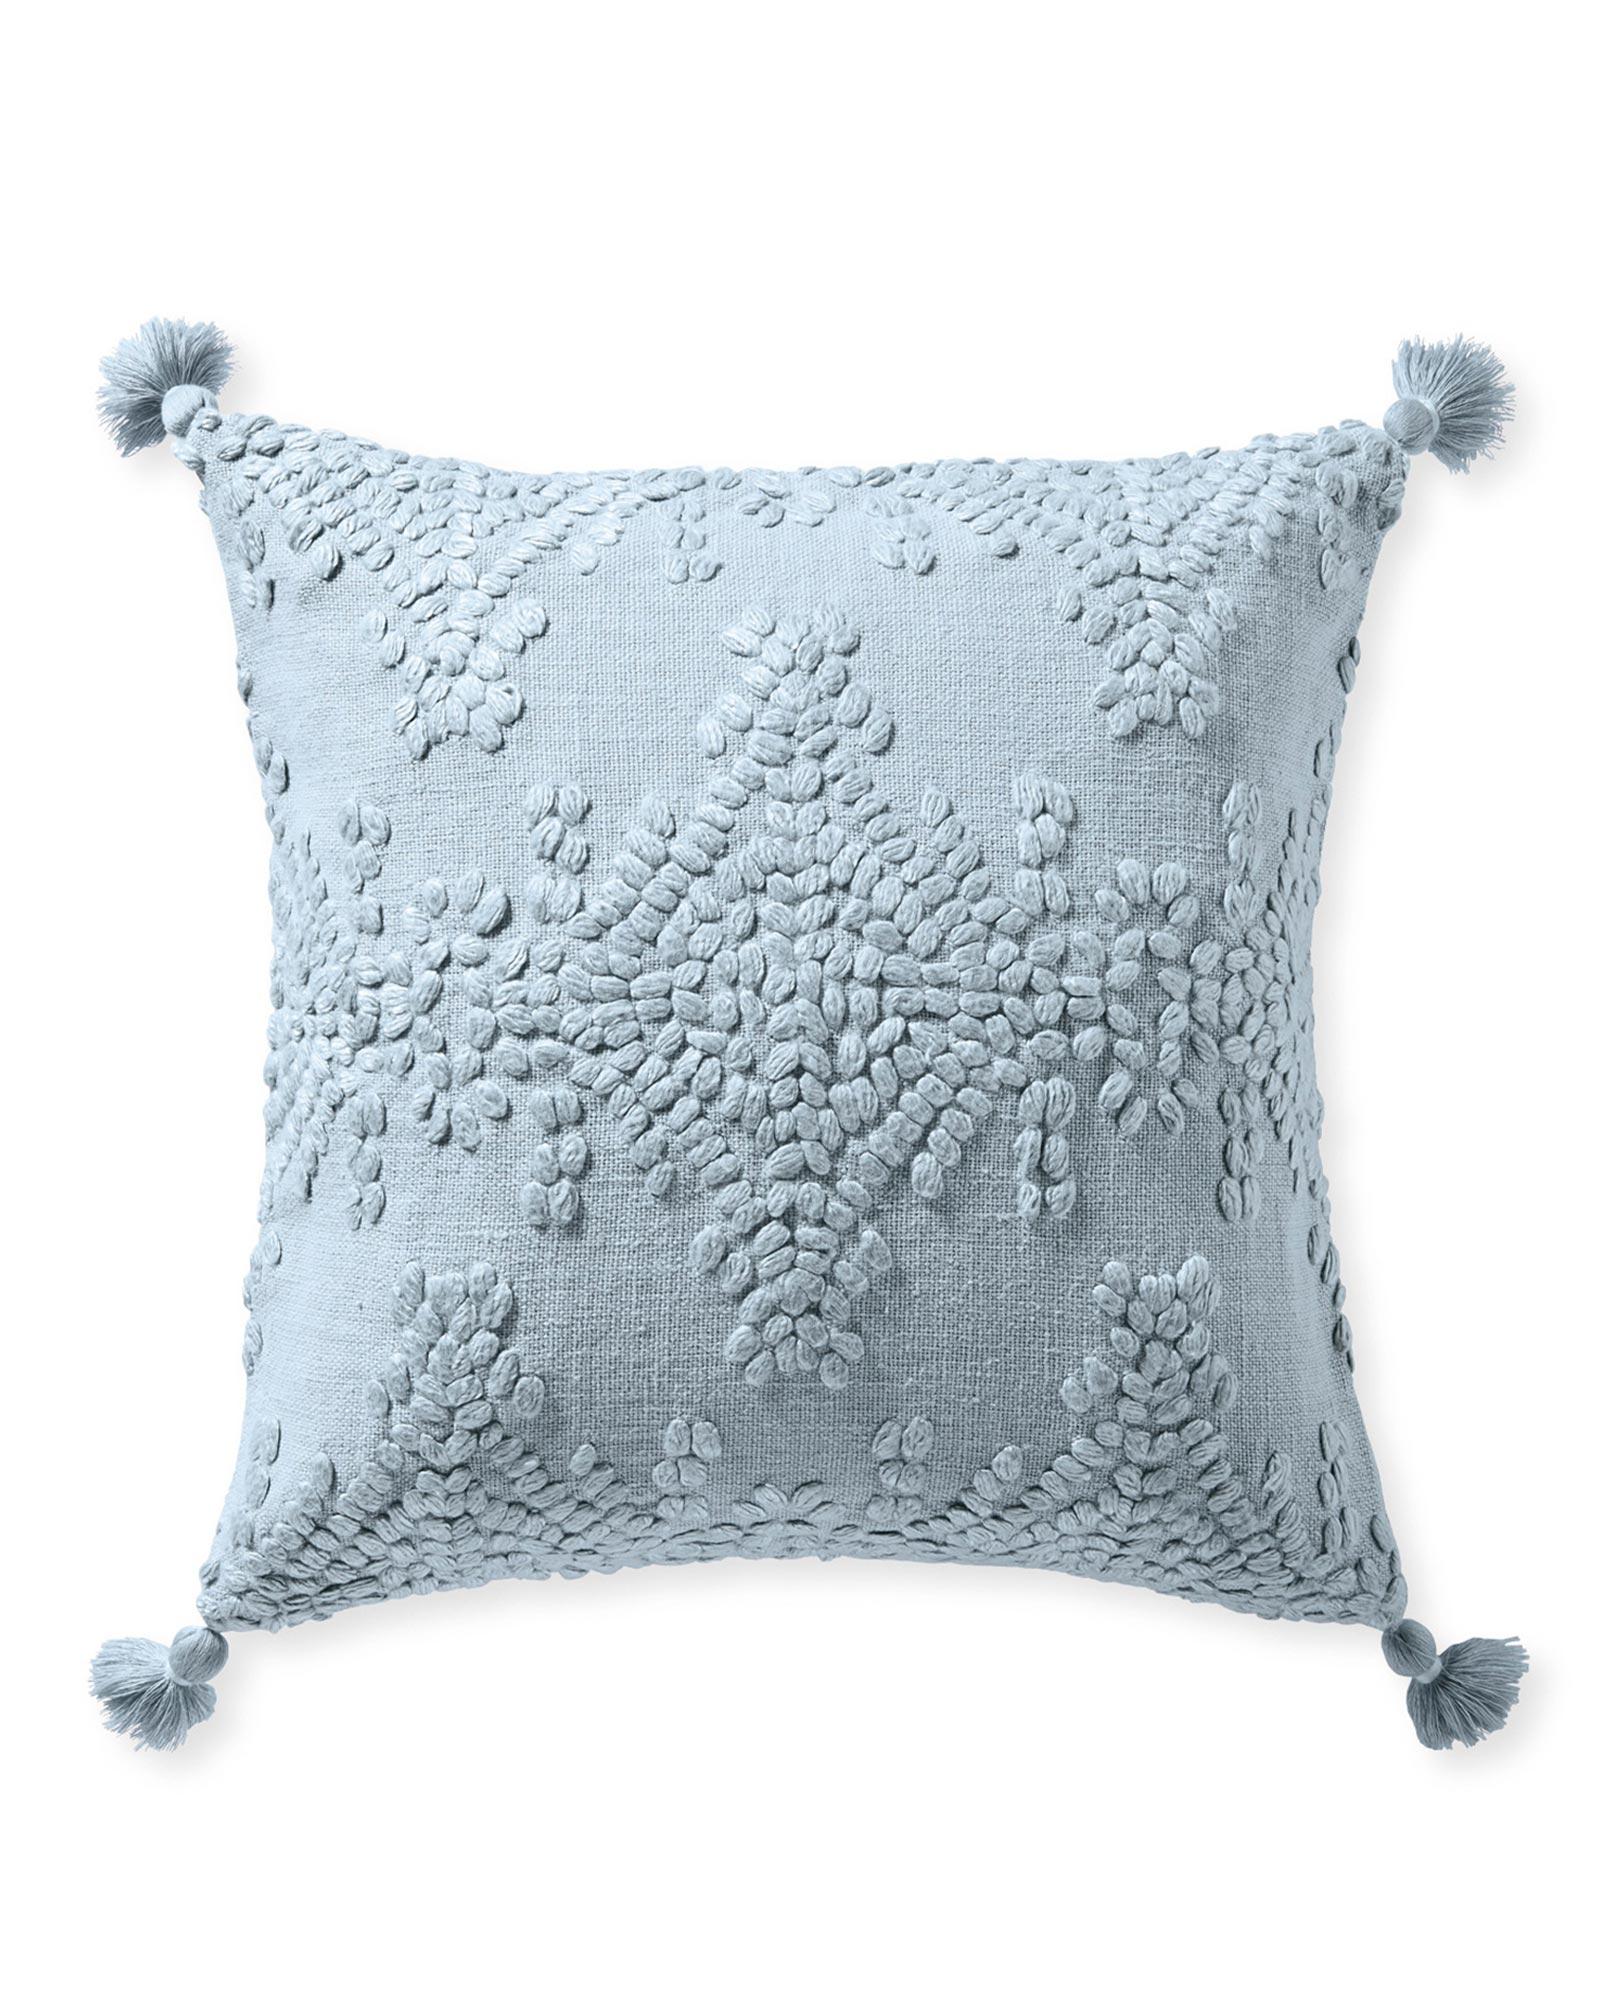 Linen Floor Cushion With Handle, Natural Blue